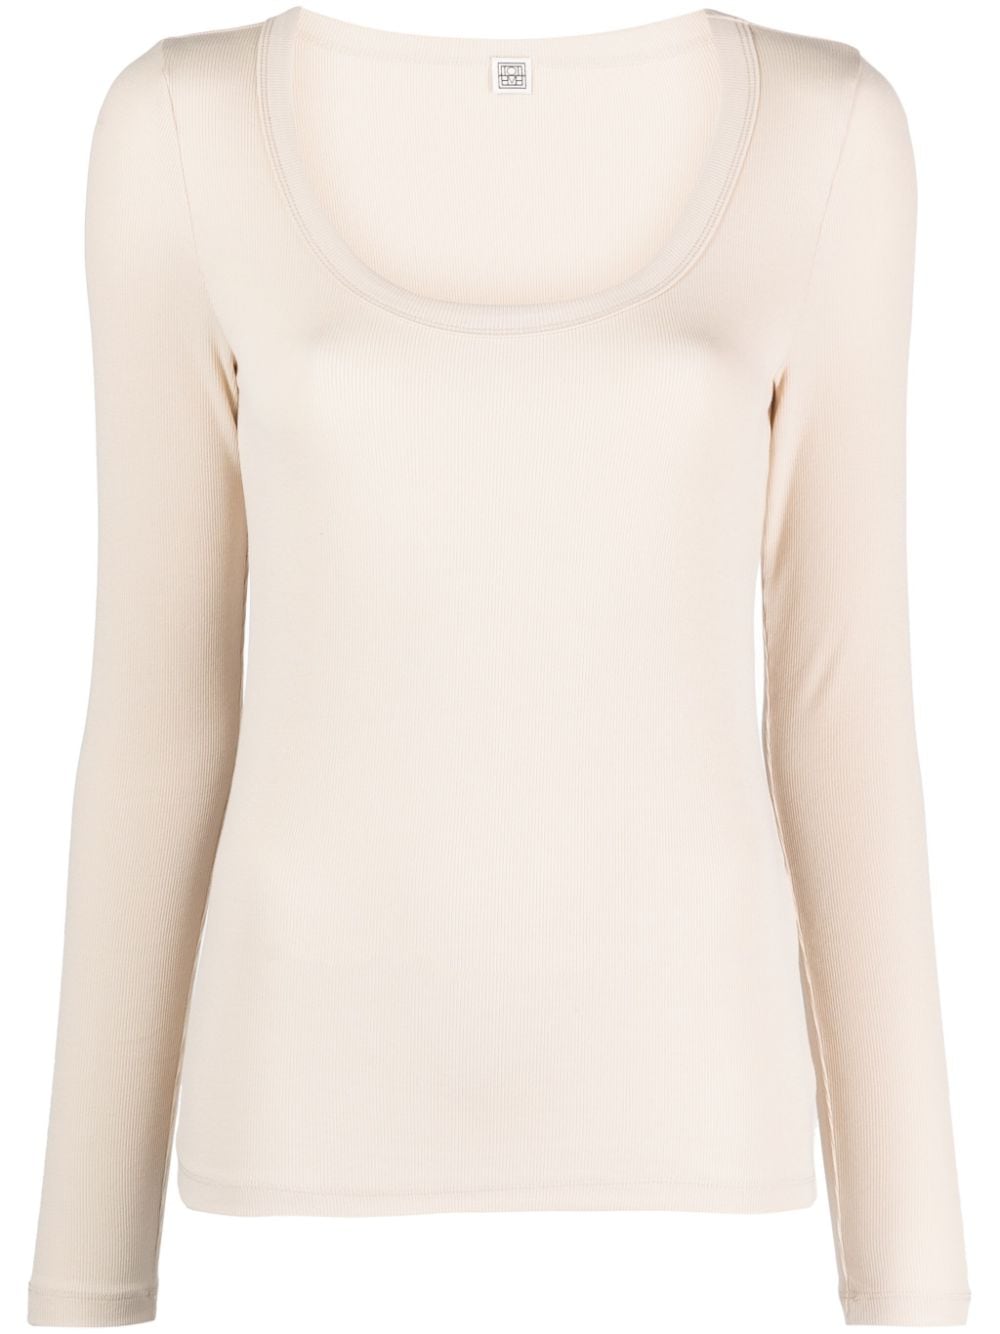 TOTEME Classic ribbed top - Neutrals von TOTEME